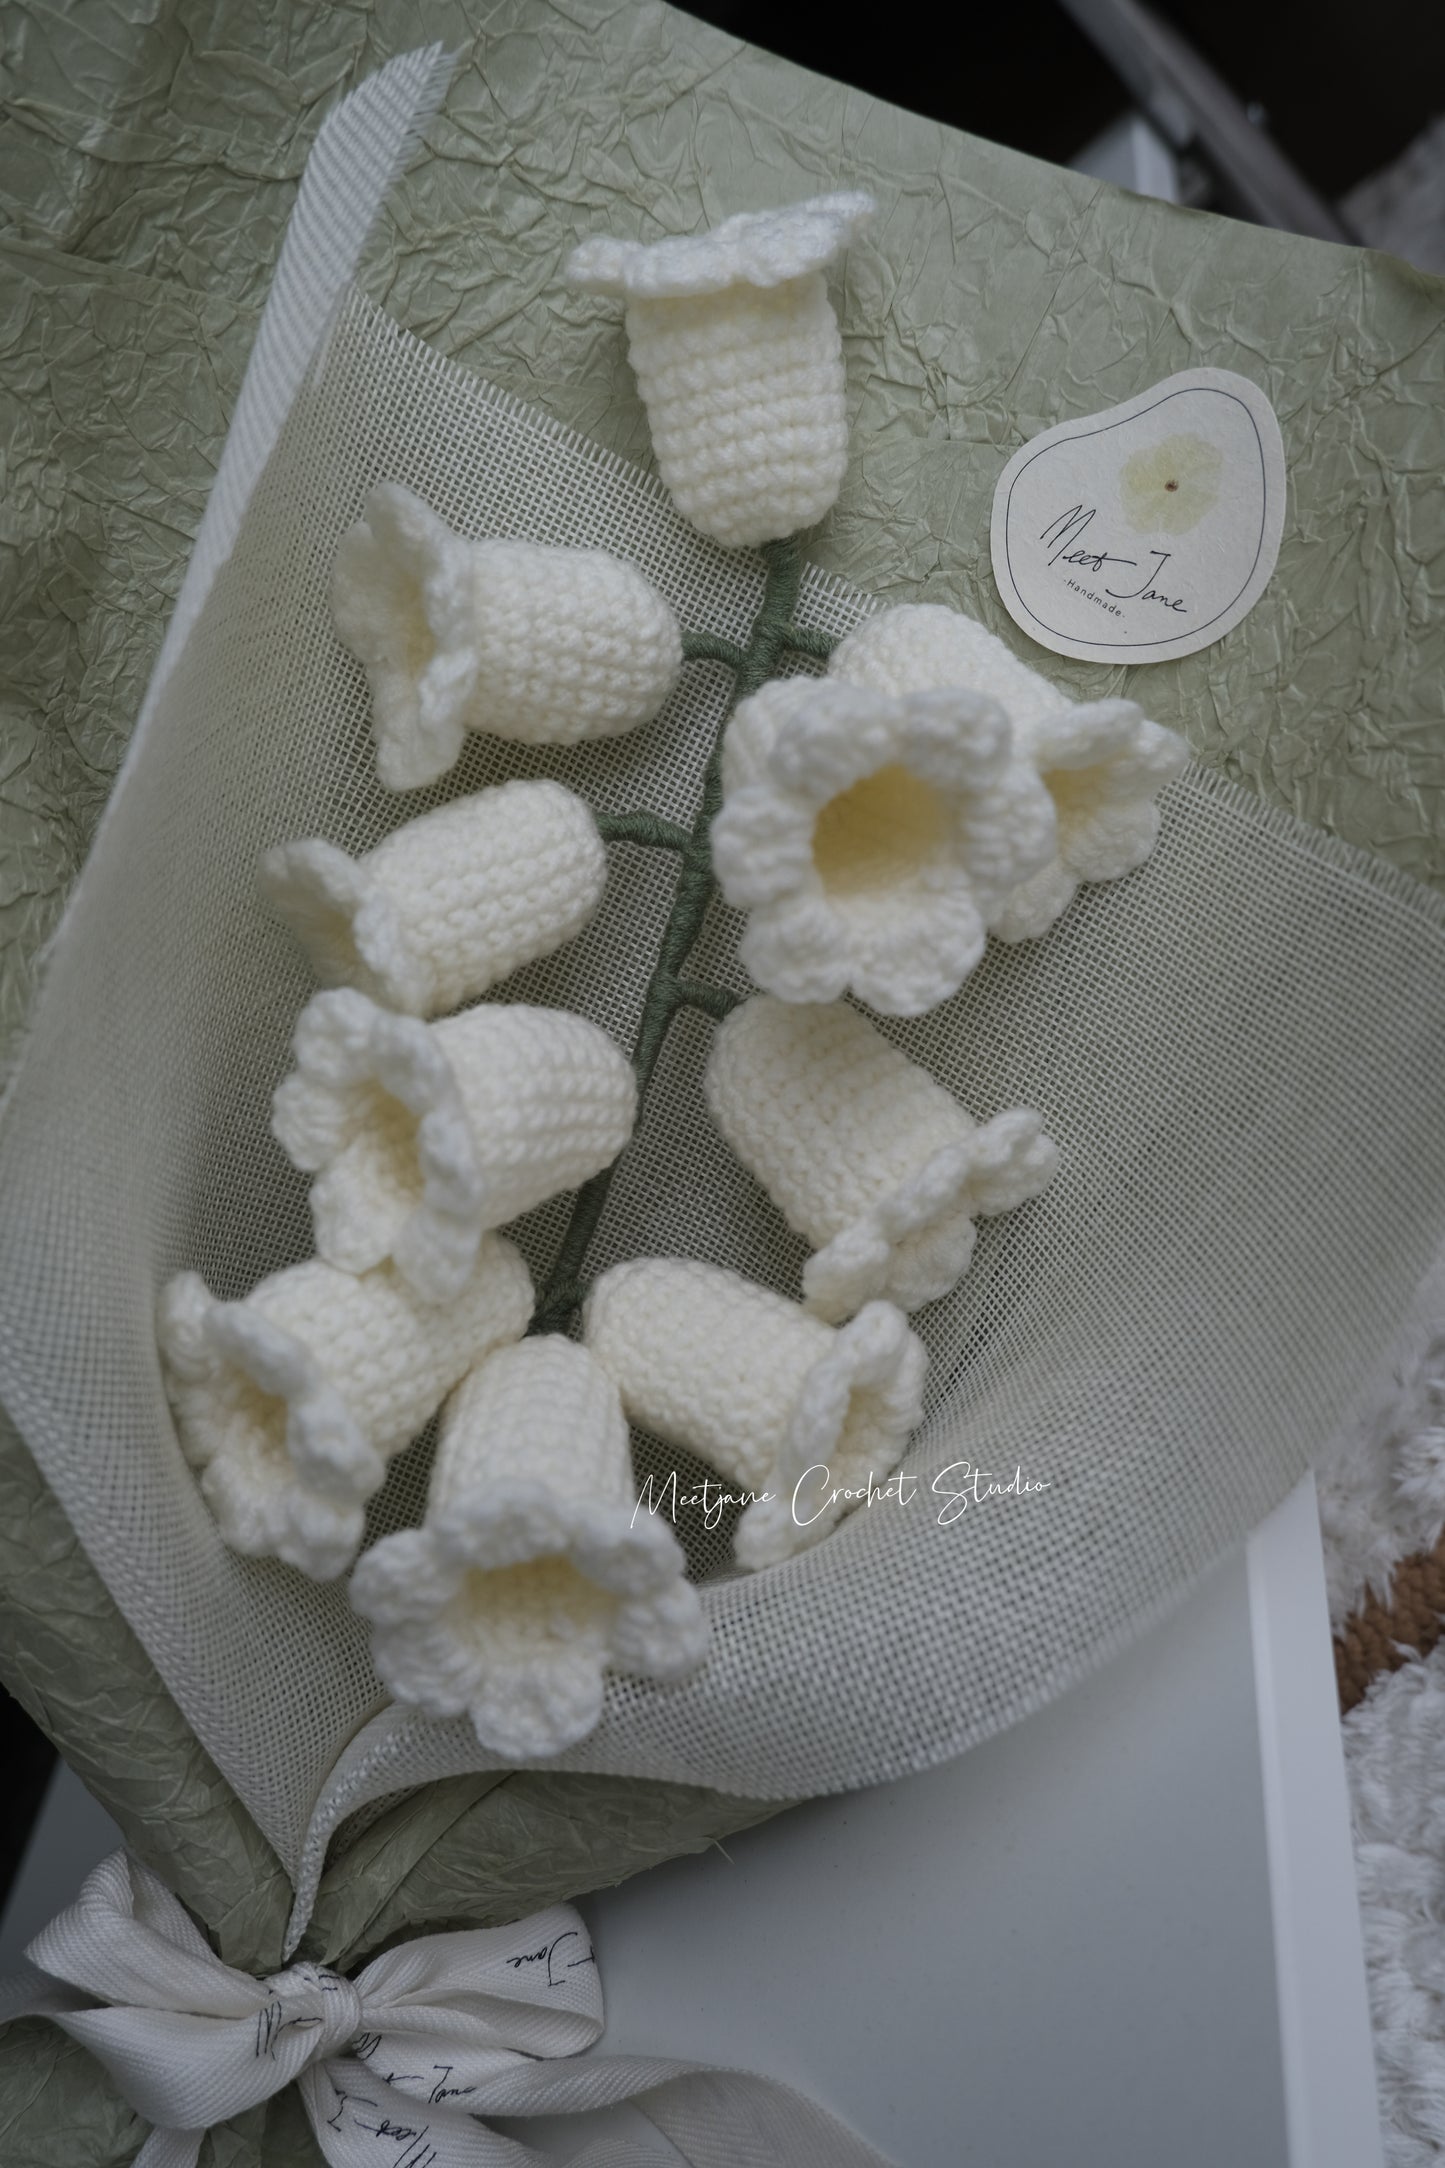 Crochet Workshop| Learn to crochet Lily of the Valley|【2 sessions】